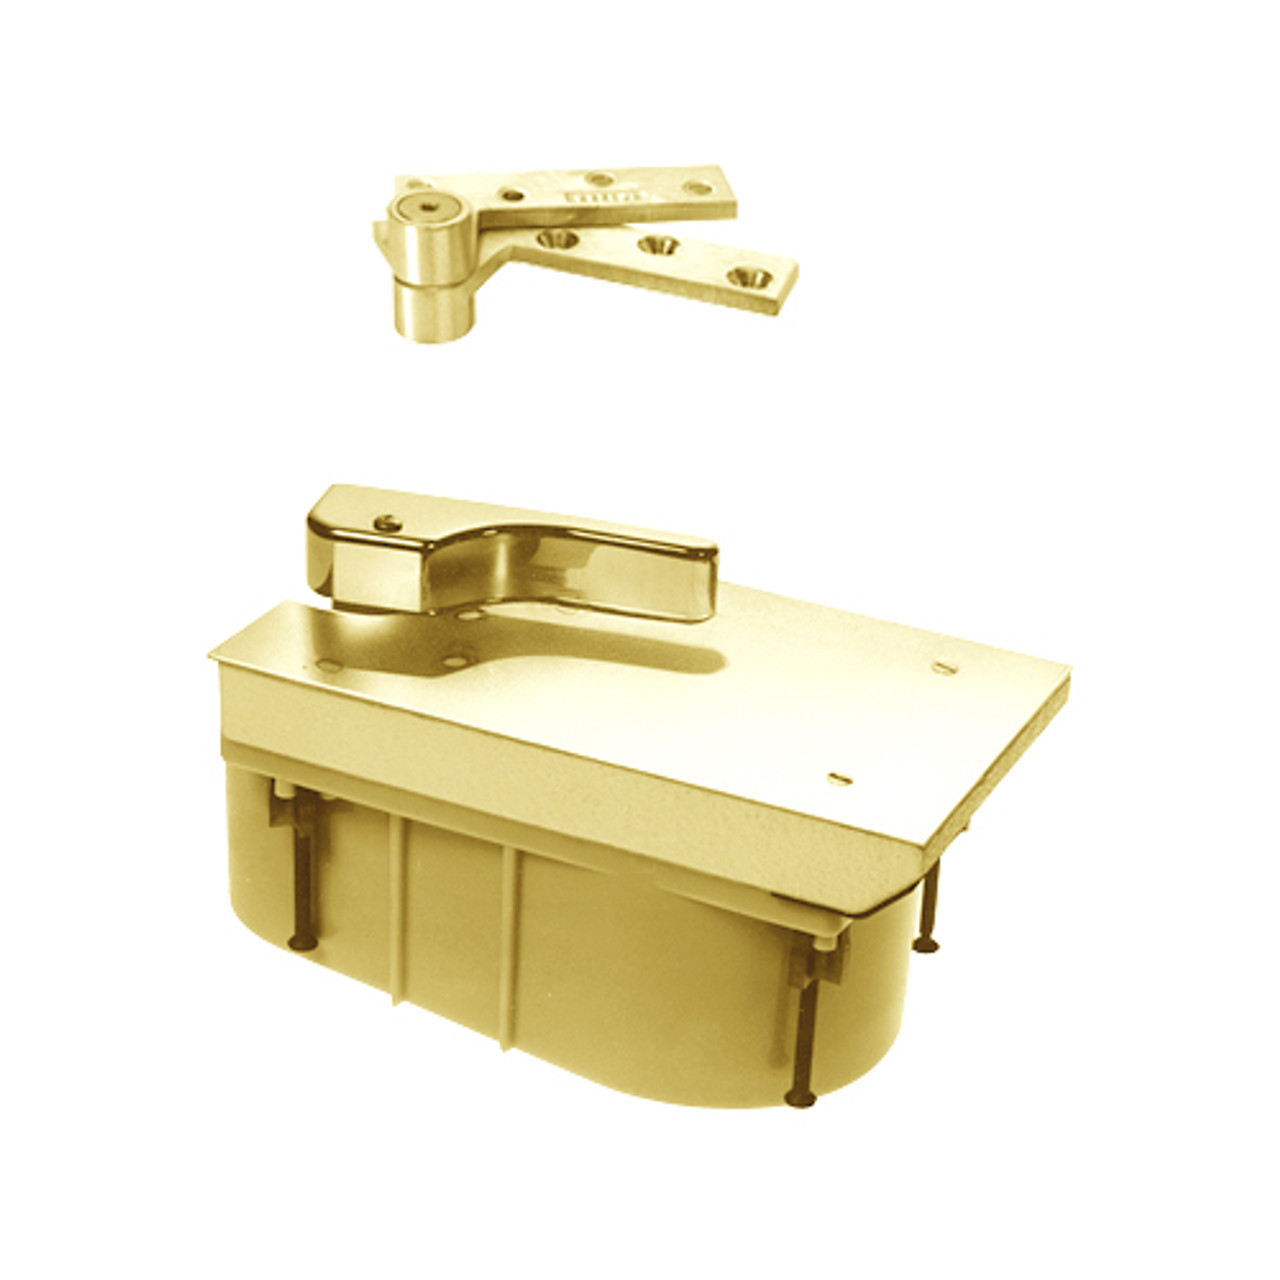 QT27-85S-CWF-LH-605 Rixson 27 Series Heavy Duty Quick Install Offset Hung Floor Closer in Bright Brass Finish